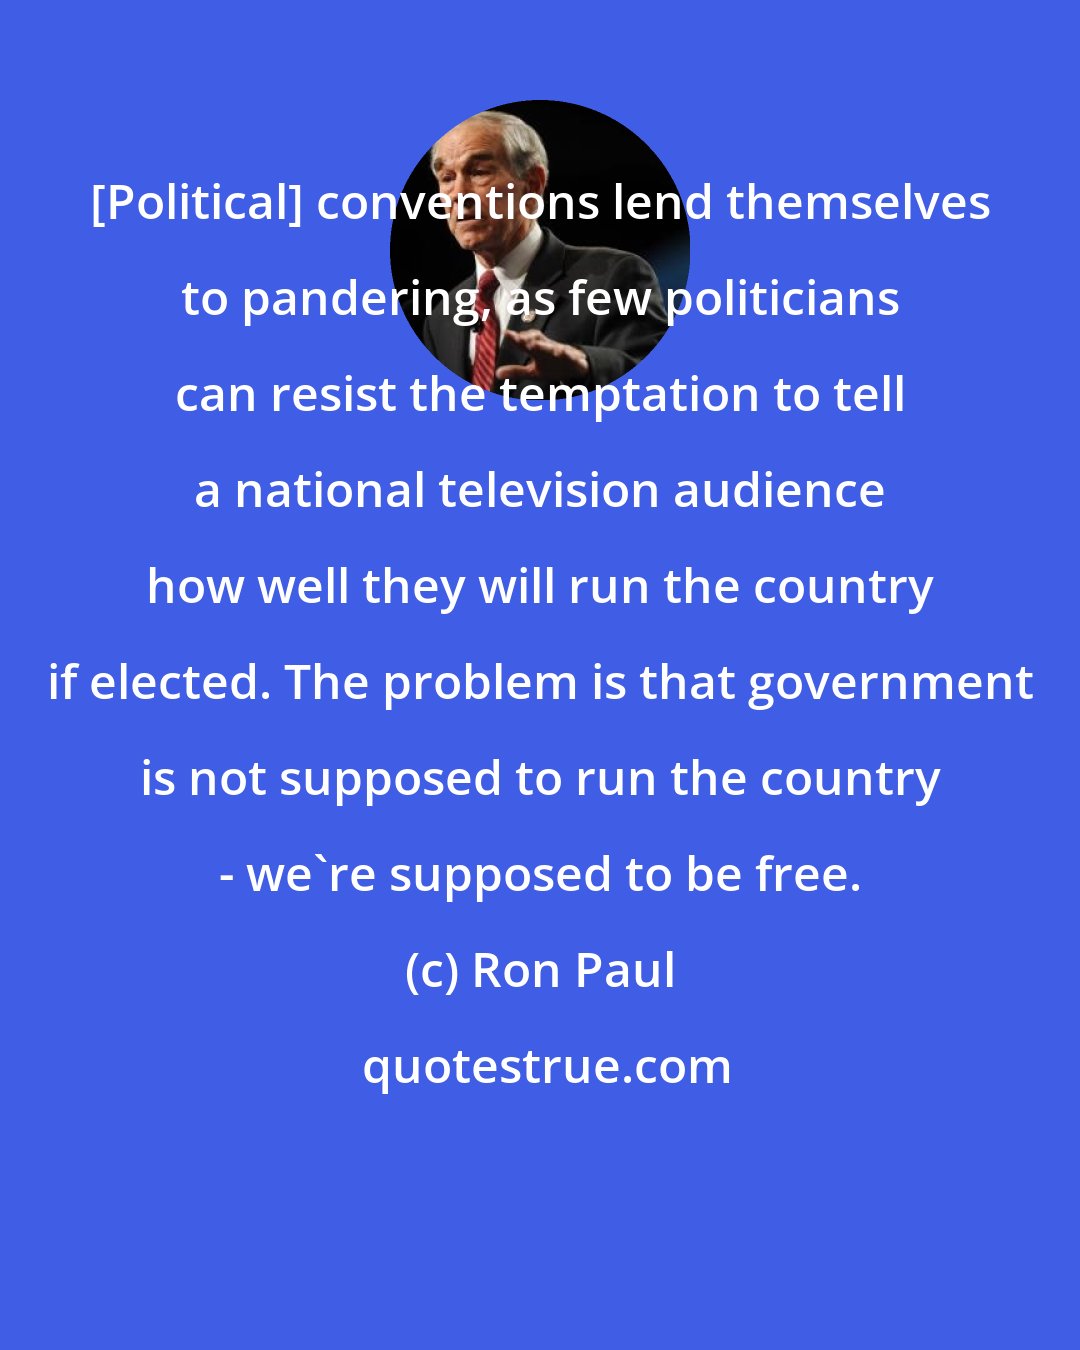 Ron Paul: [Political] conventions lend themselves to pandering, as few politicians can resist the temptation to tell a national television audience how well they will run the country if elected. The problem is that government is not supposed to run the country - we're supposed to be free.